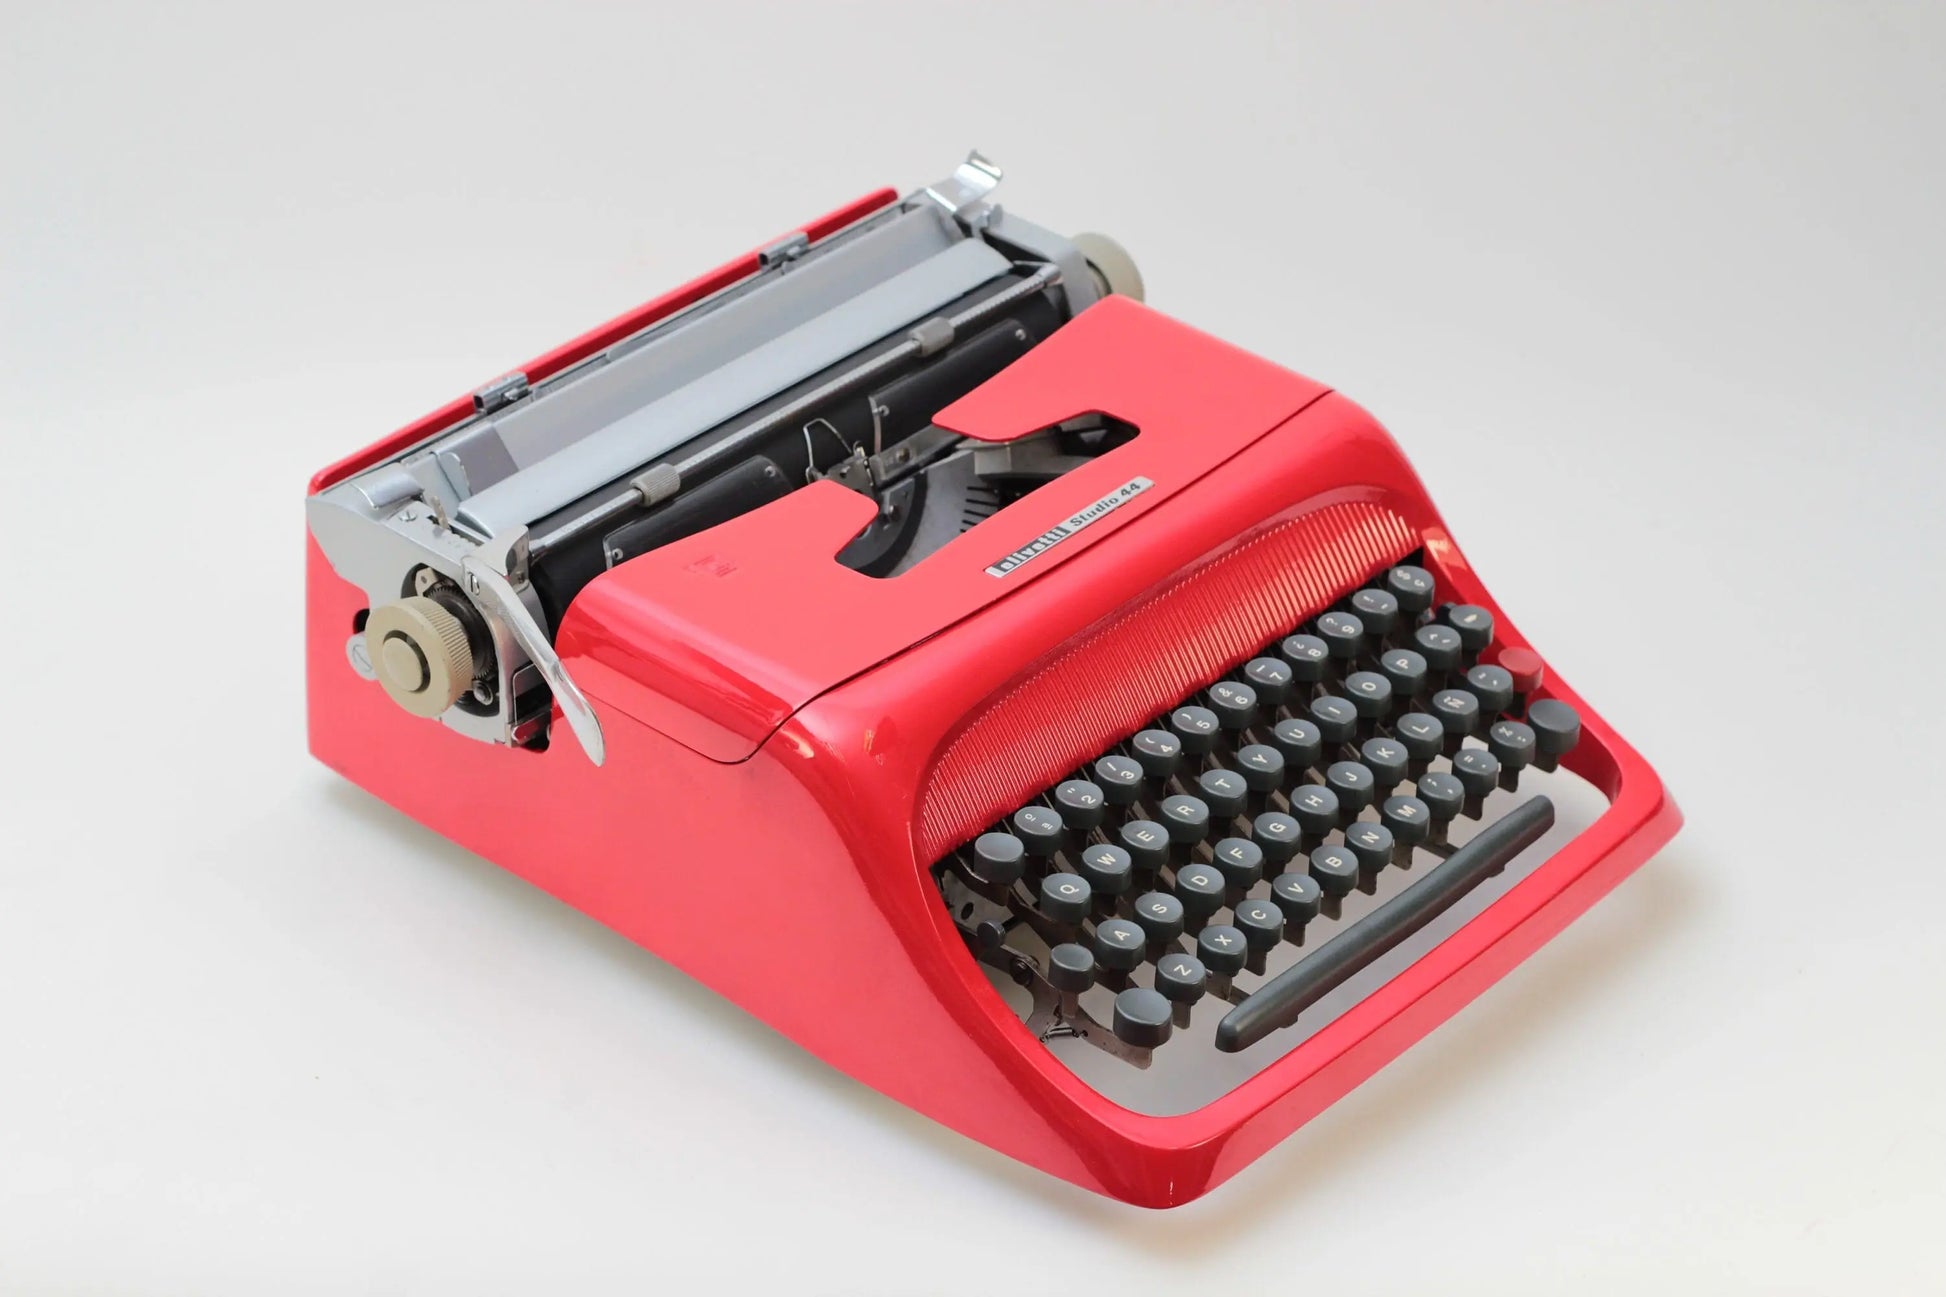 Limited Edition Olivetti Studio 44 Red Typewriter, Vintage, Mint Condition, Manual Portable, Professionally Serviced by Typewriter.Company - ElGranero Typewriter.Company